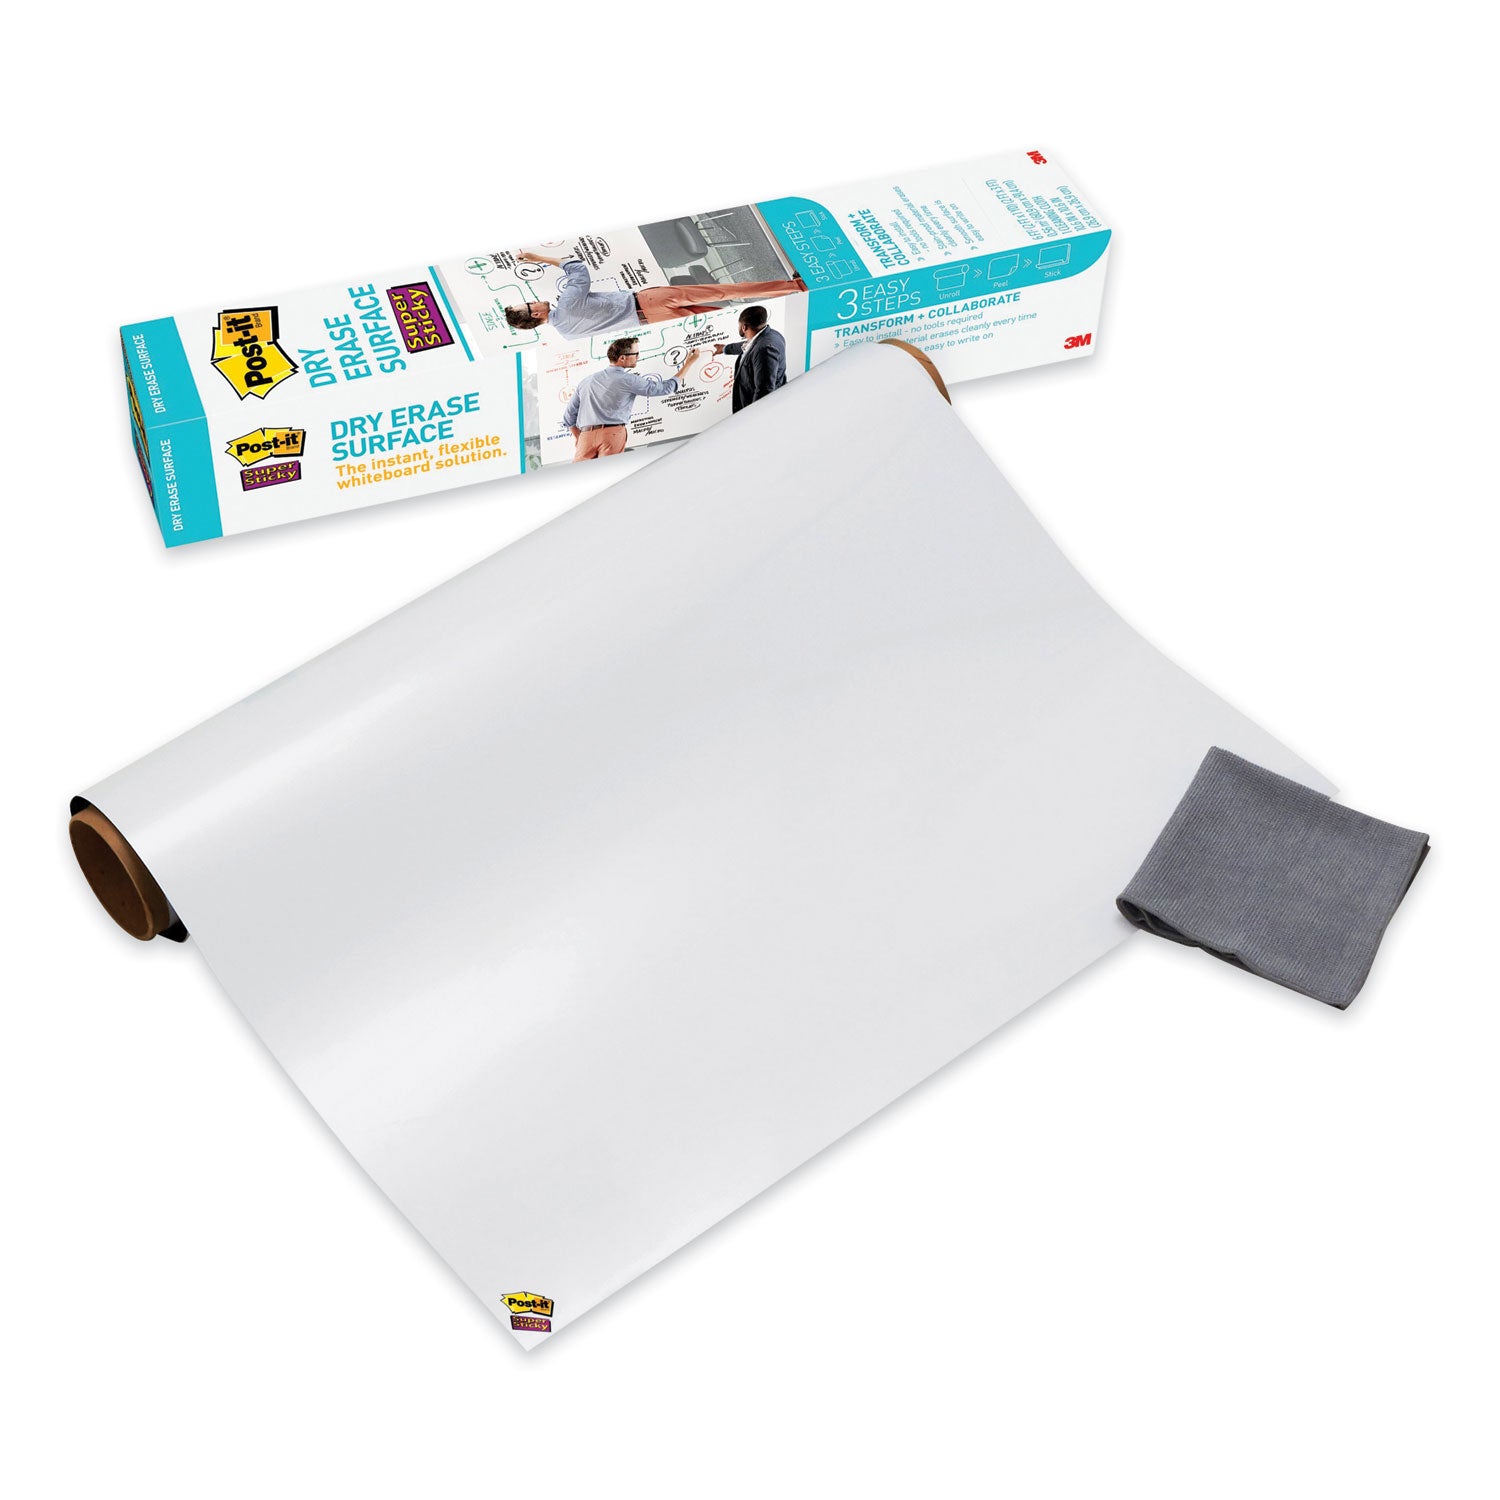 Dry Erase Surface with Adhesive Backing, 36 x 24, White Surface - 